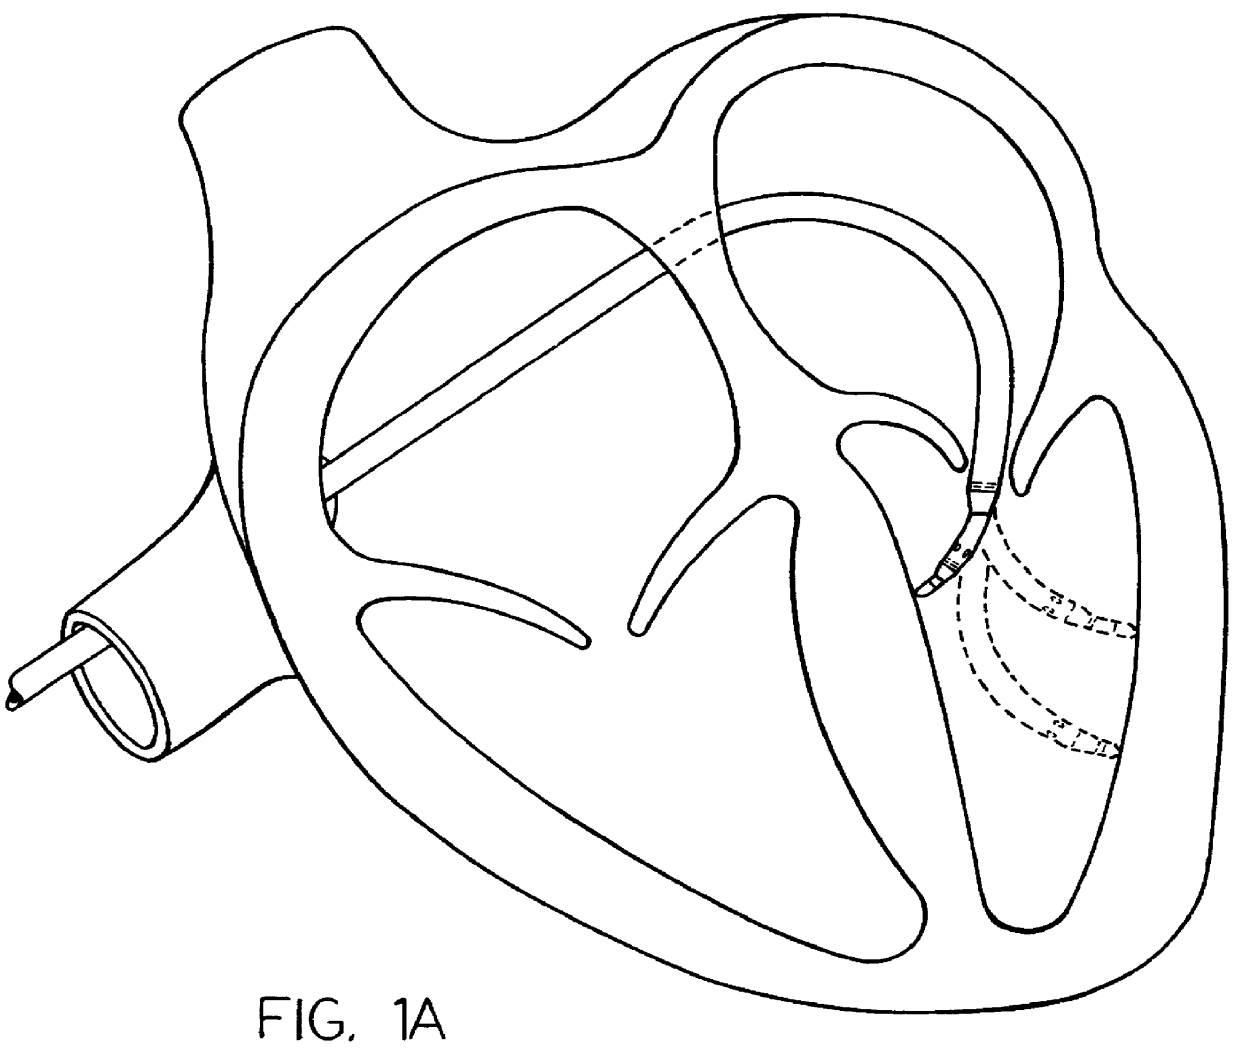 Guiding introducer system for use in medical procedures in the left ventricle